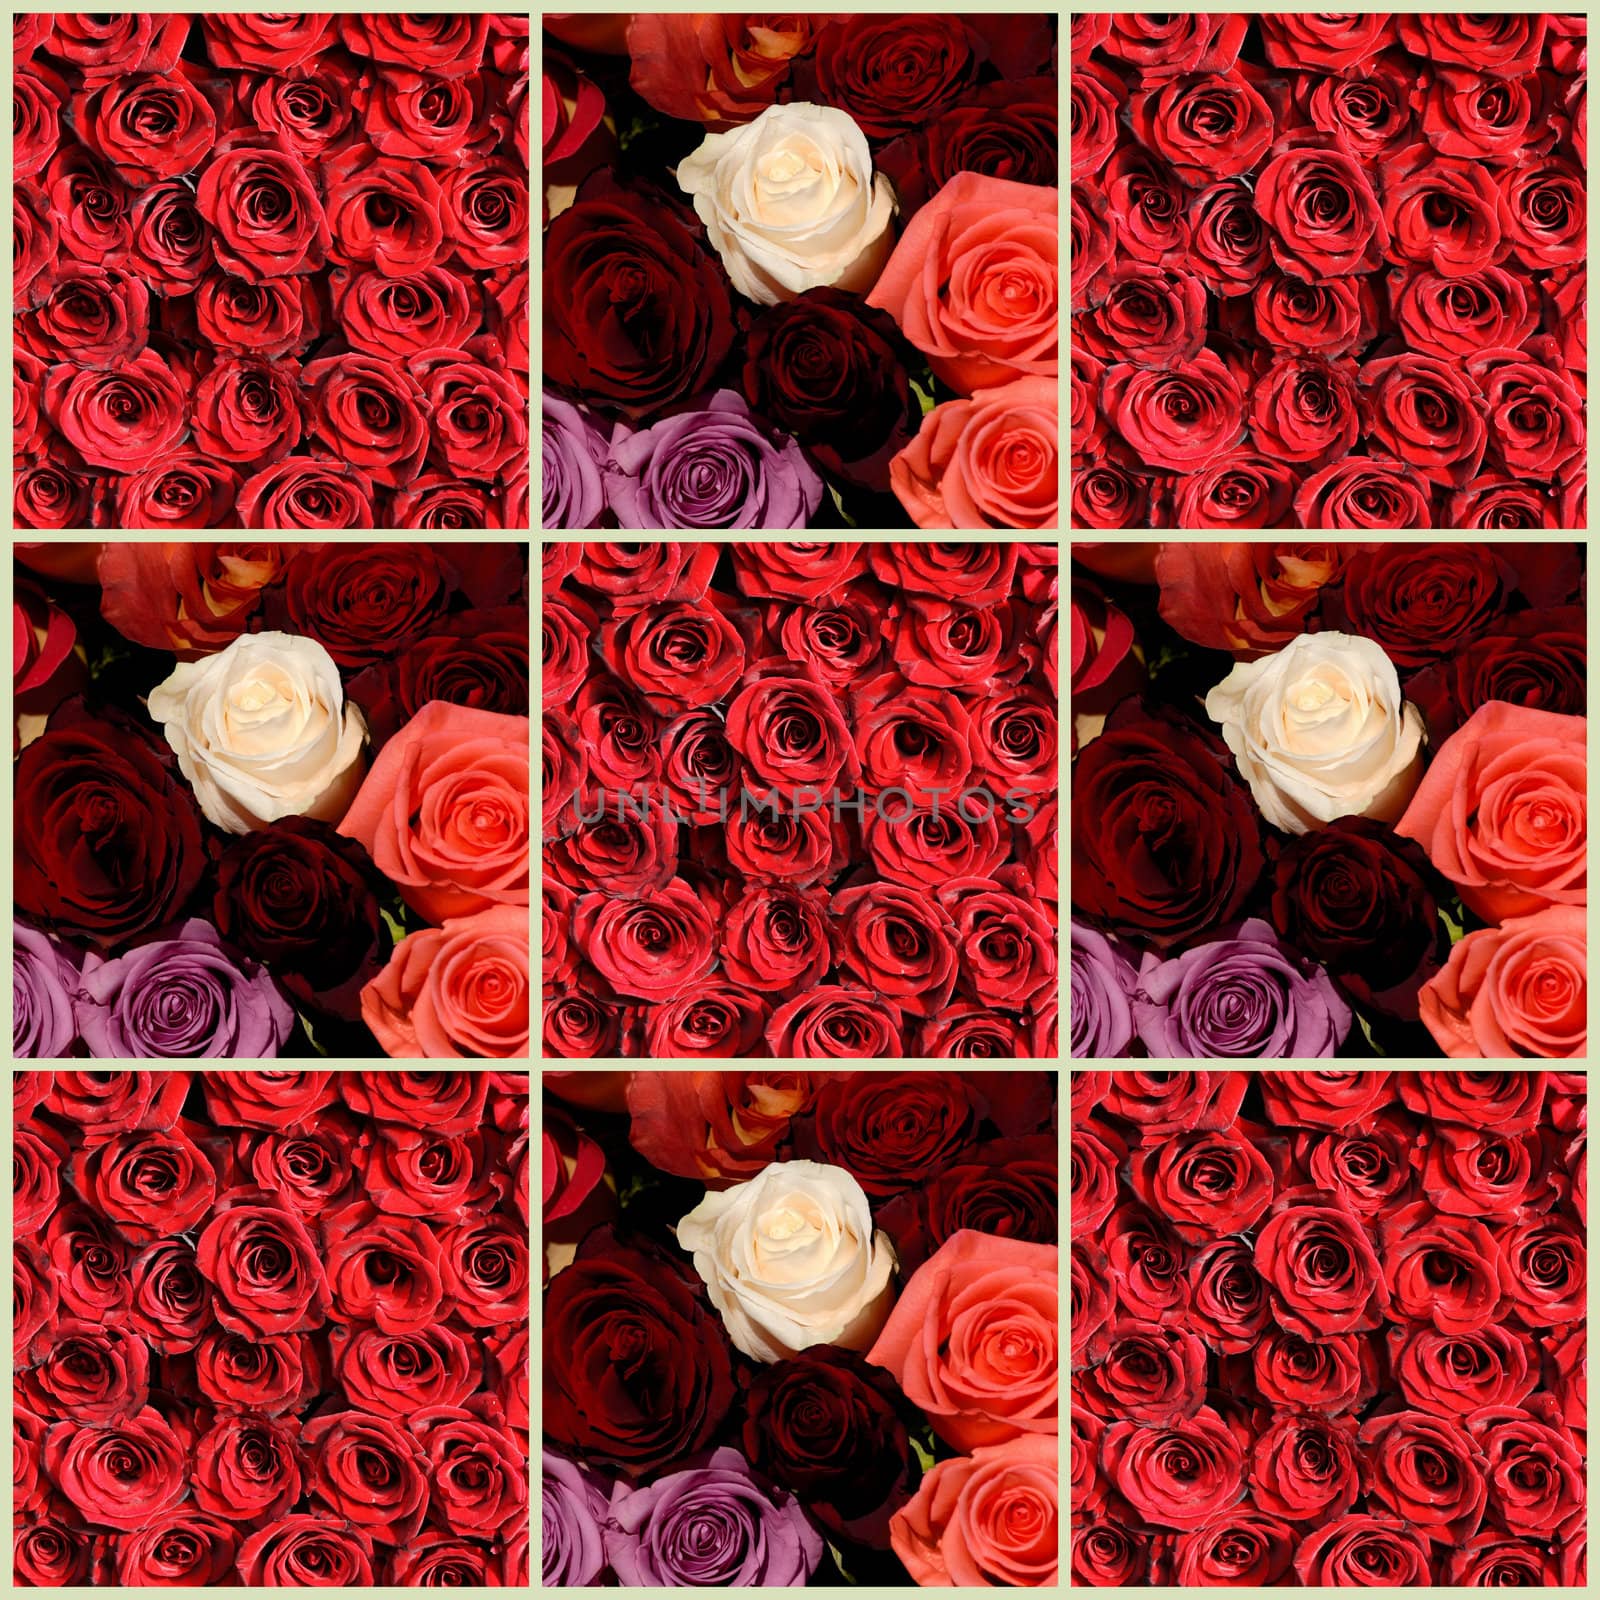 A Colorful  collage of photos from the rose flowers.